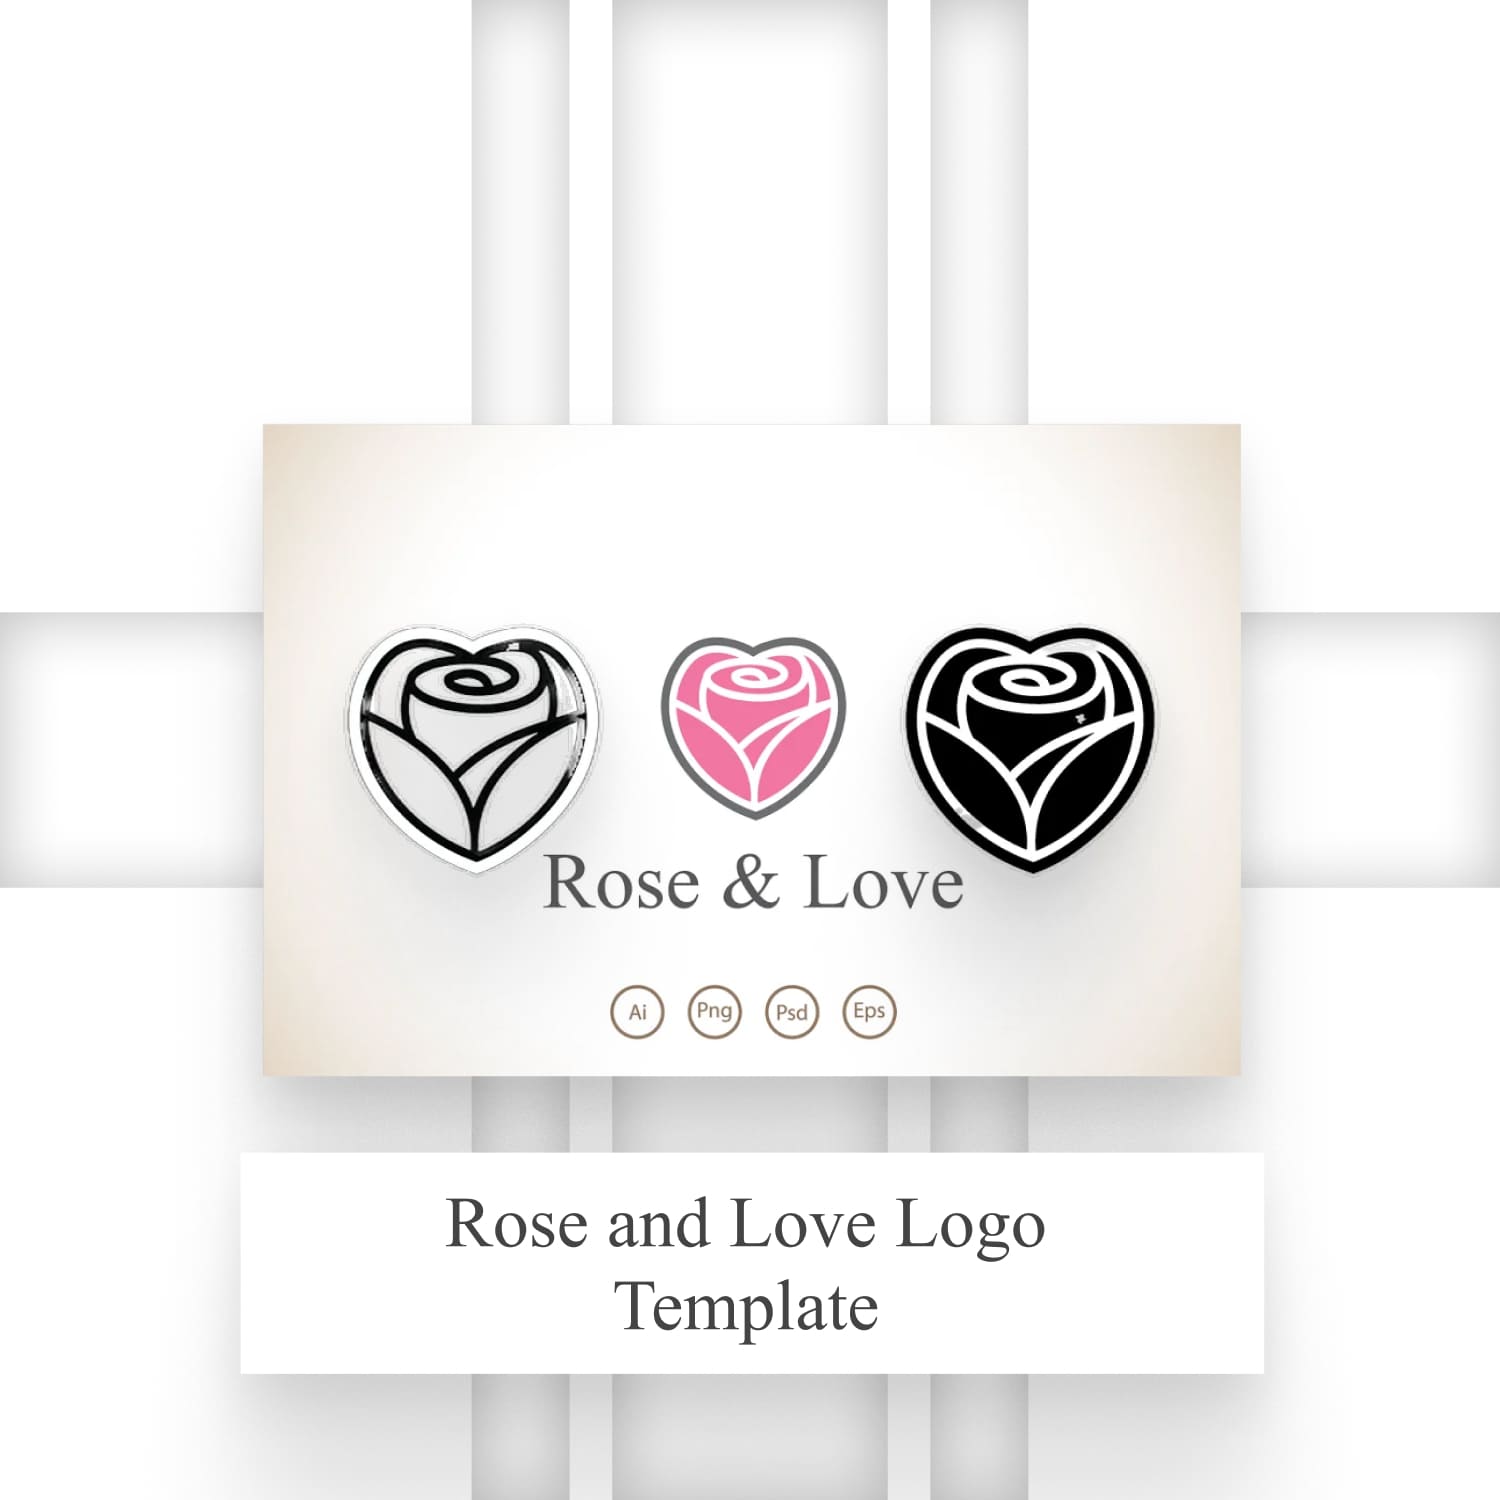 Rose and Love Logo Template.